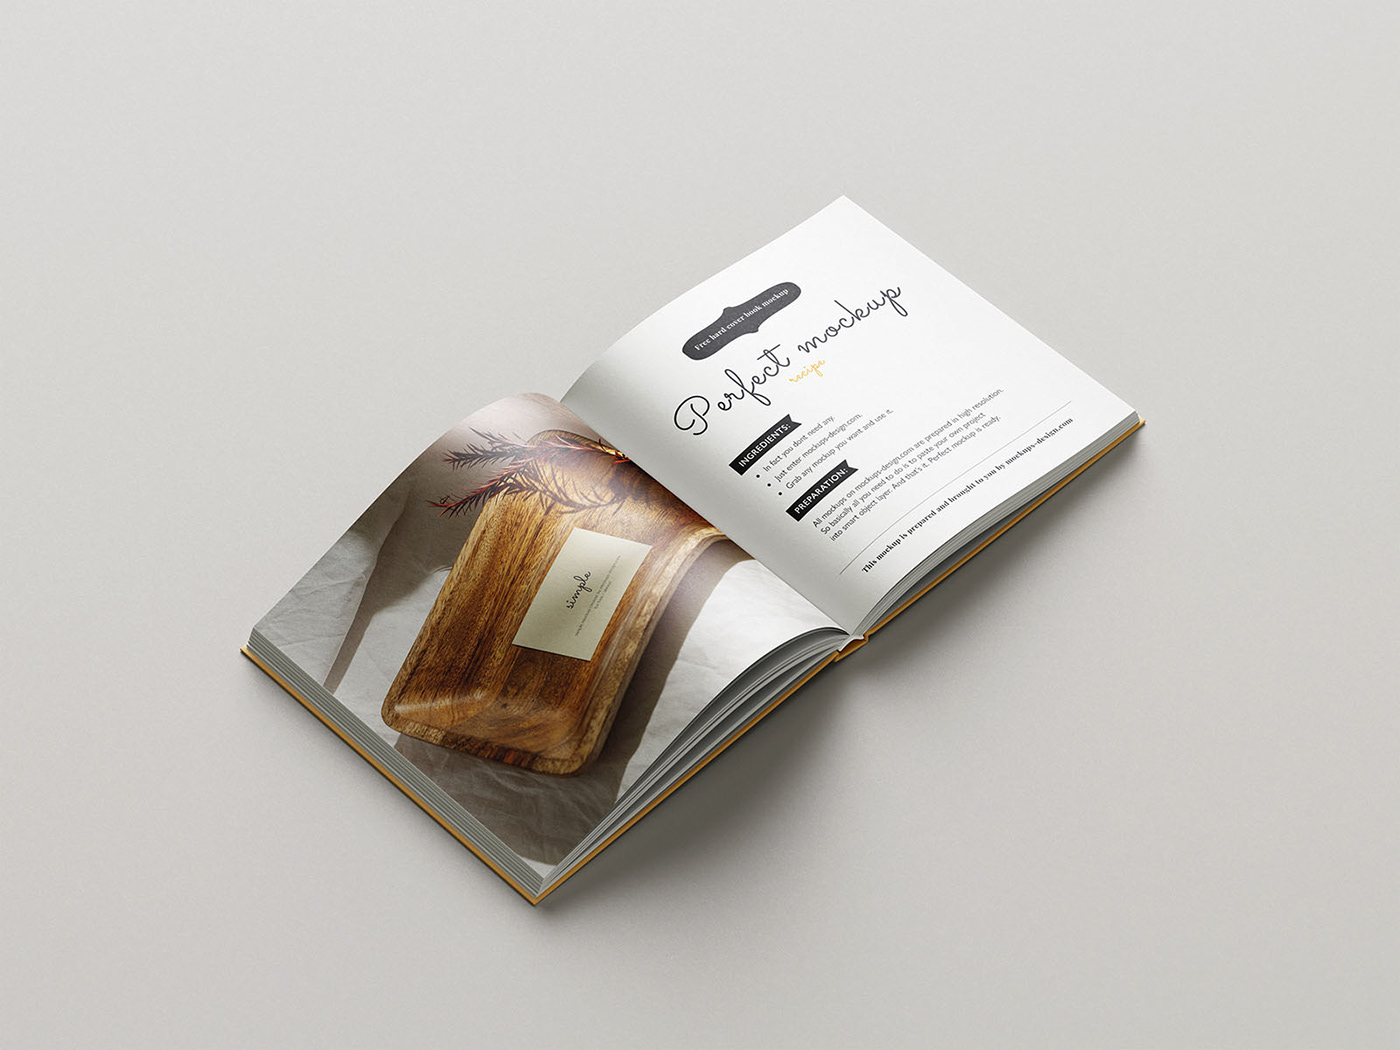 book square cover page pages hardcover Mockup psd template download